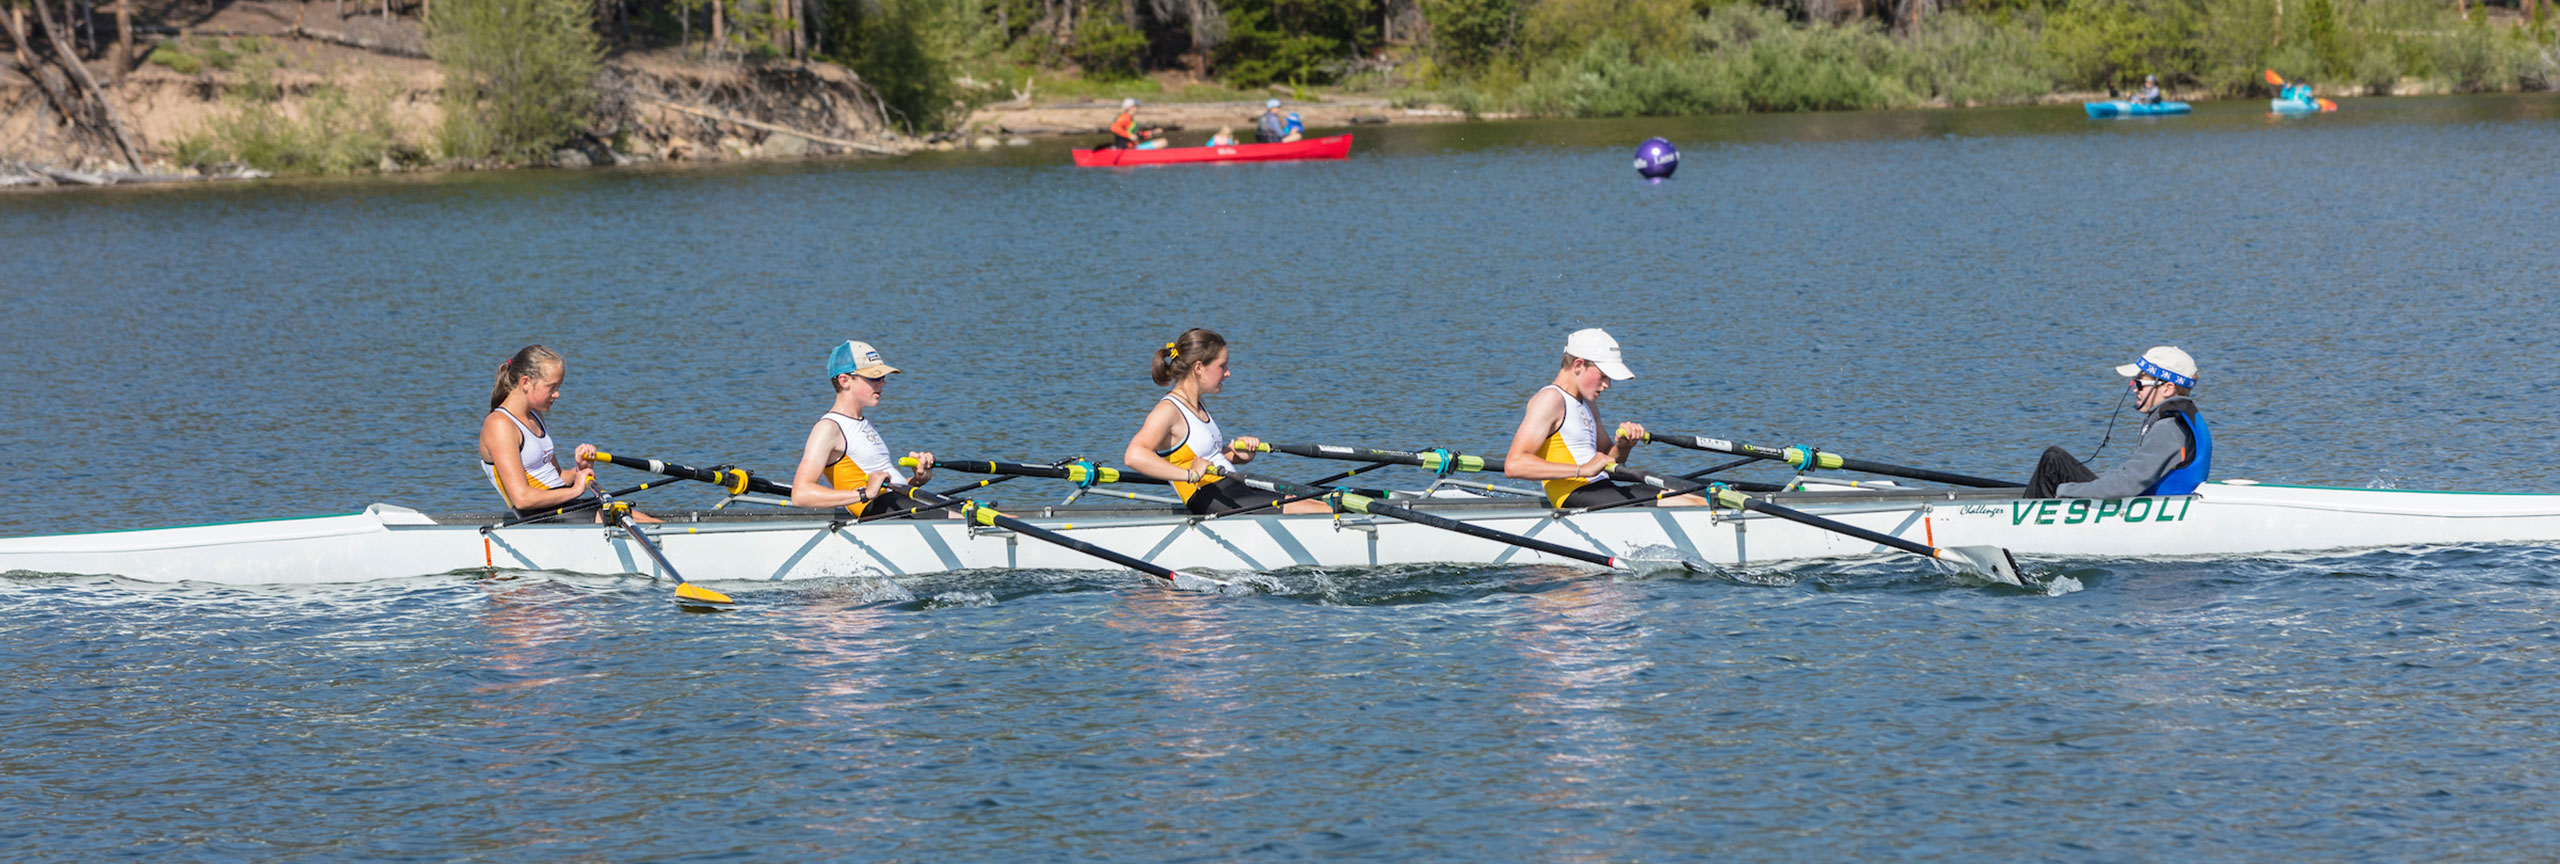 Five rowers in a rowboat on Lake Dillon.